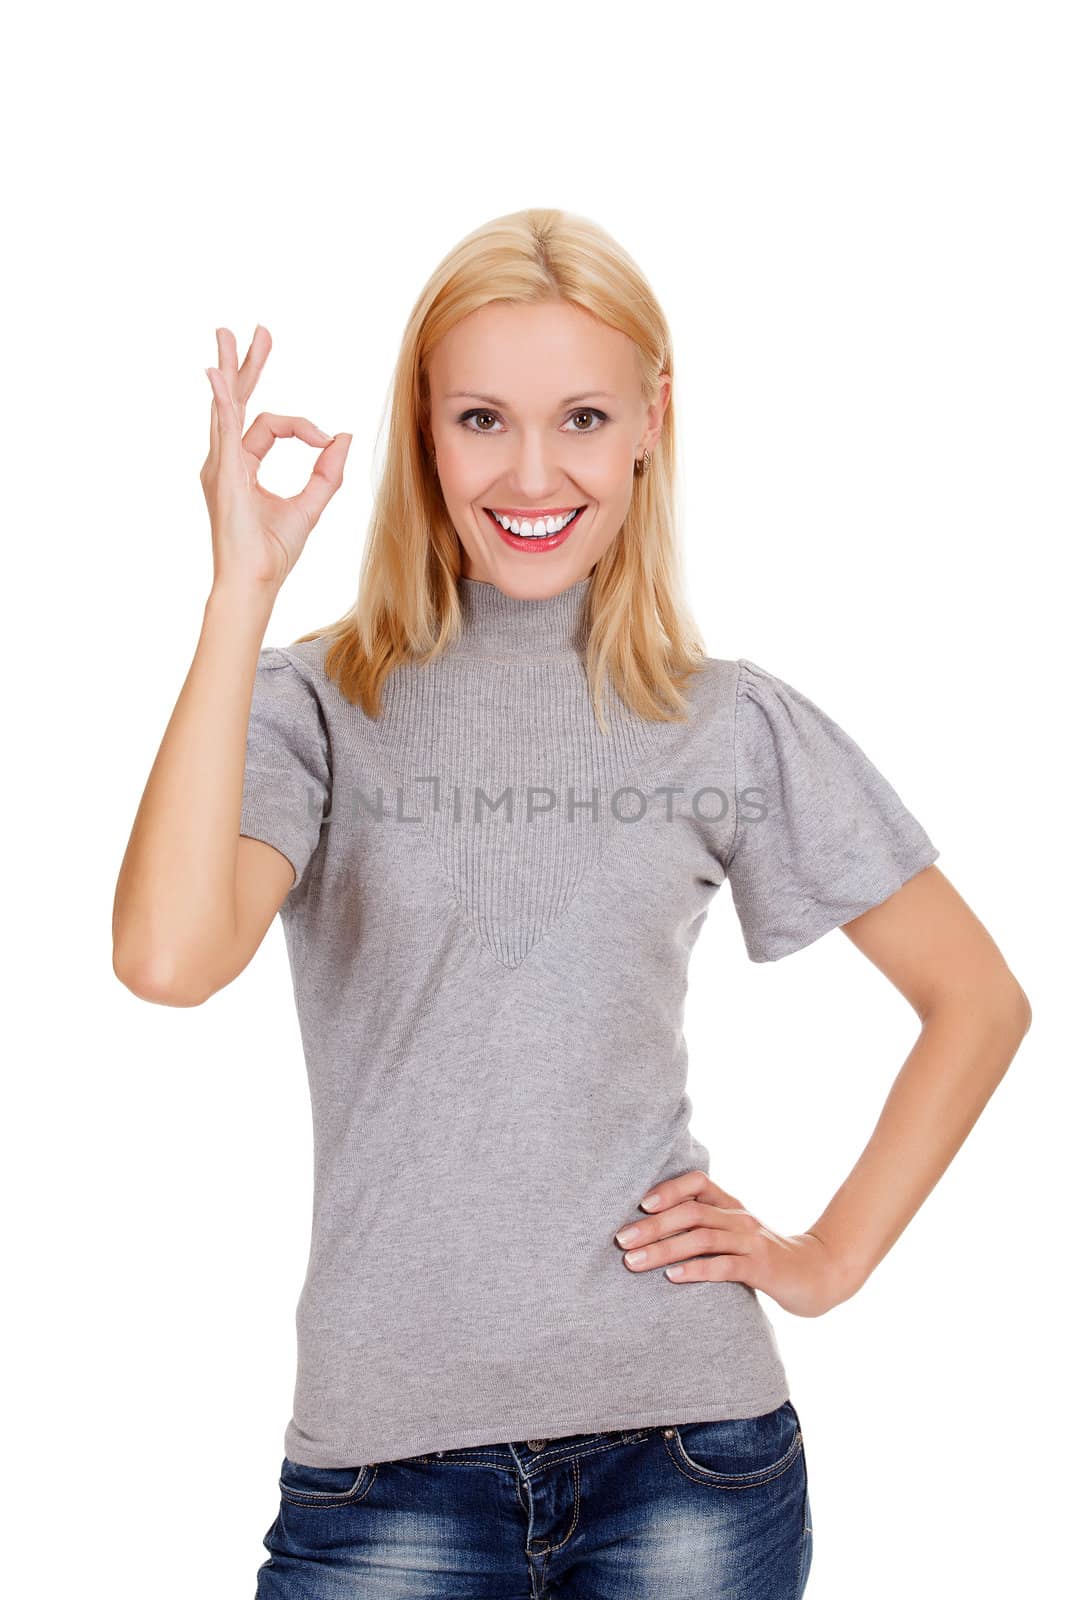 smiling beautiful woman showing okay gesture, isolated on white background